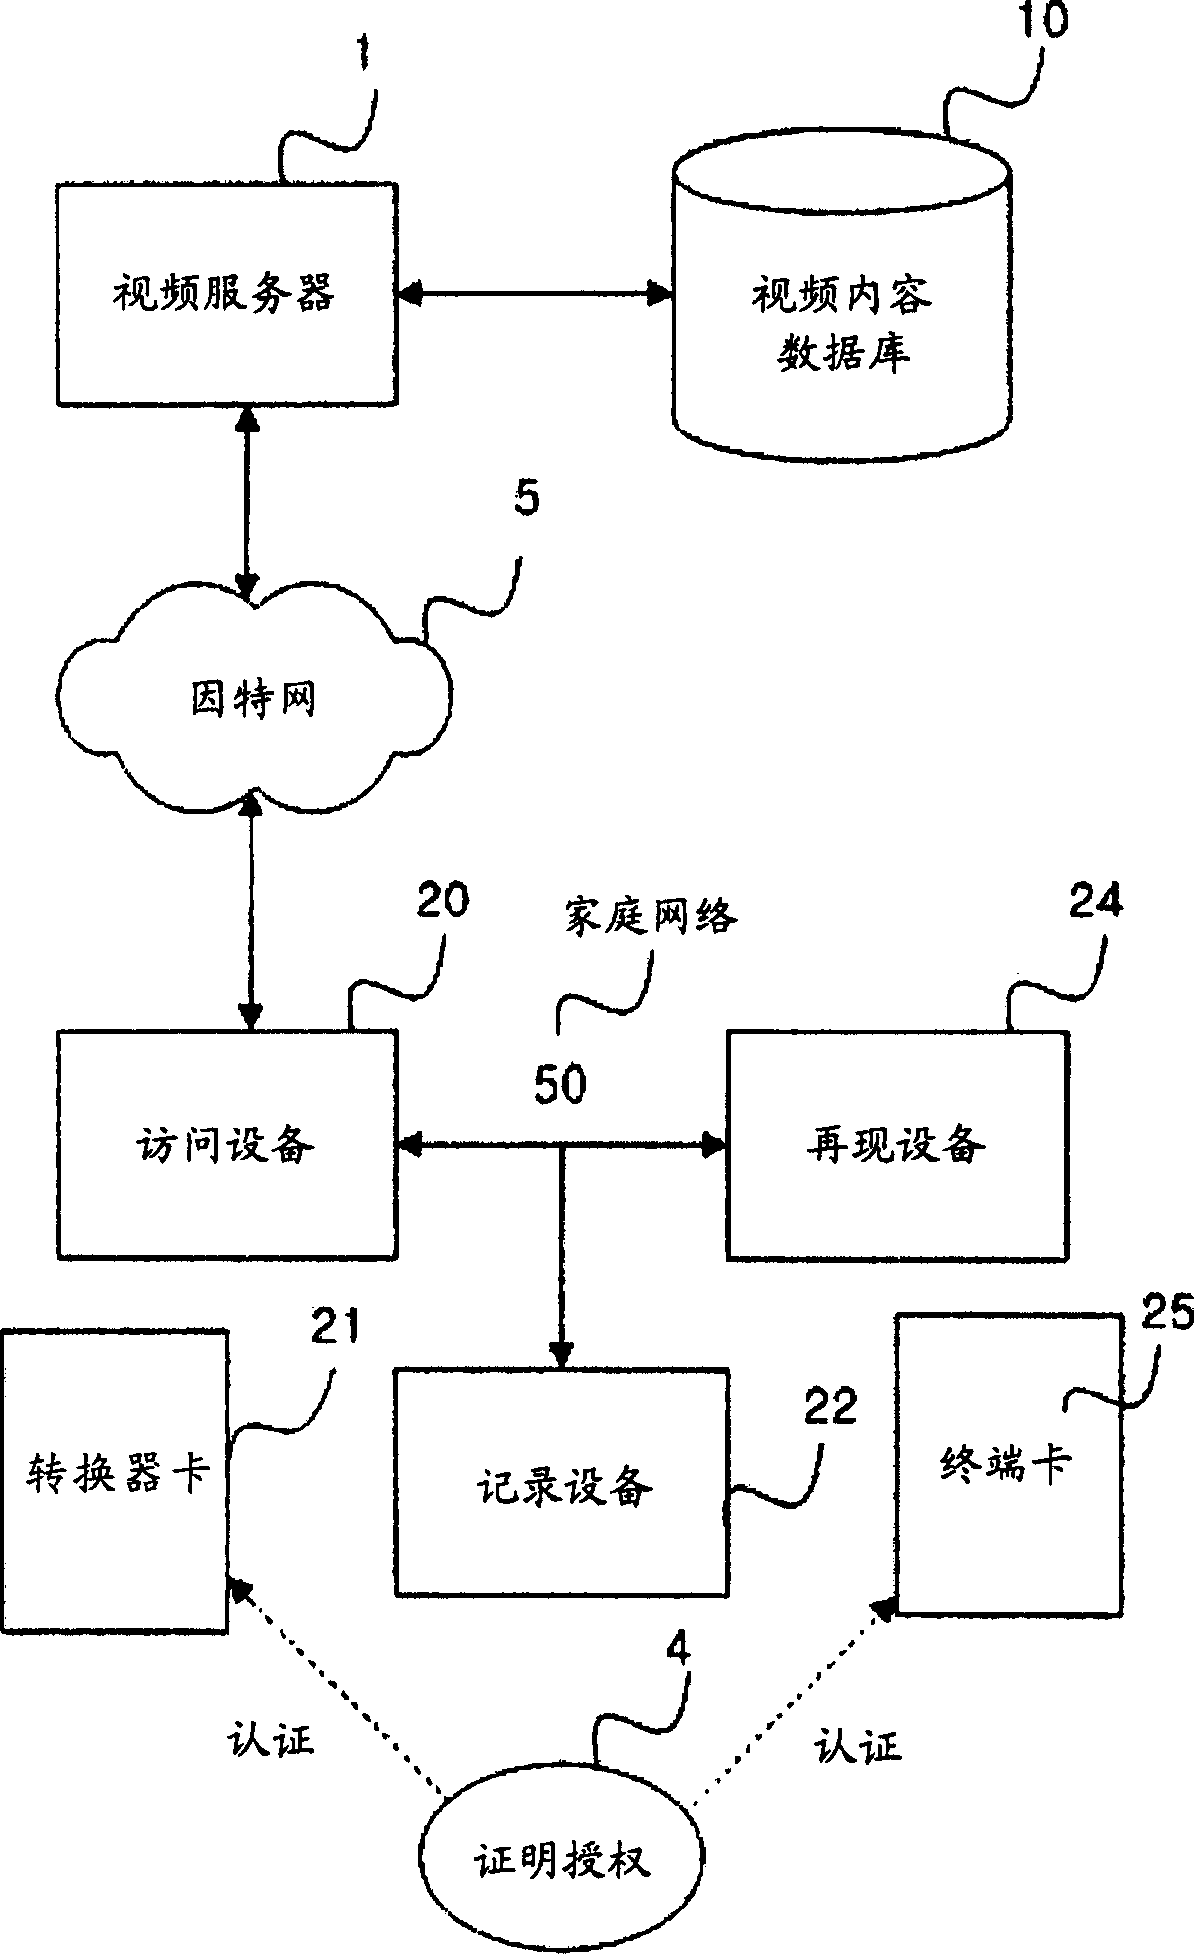 Method of establishing home domain through device authentication using smart card, and smart card for the same